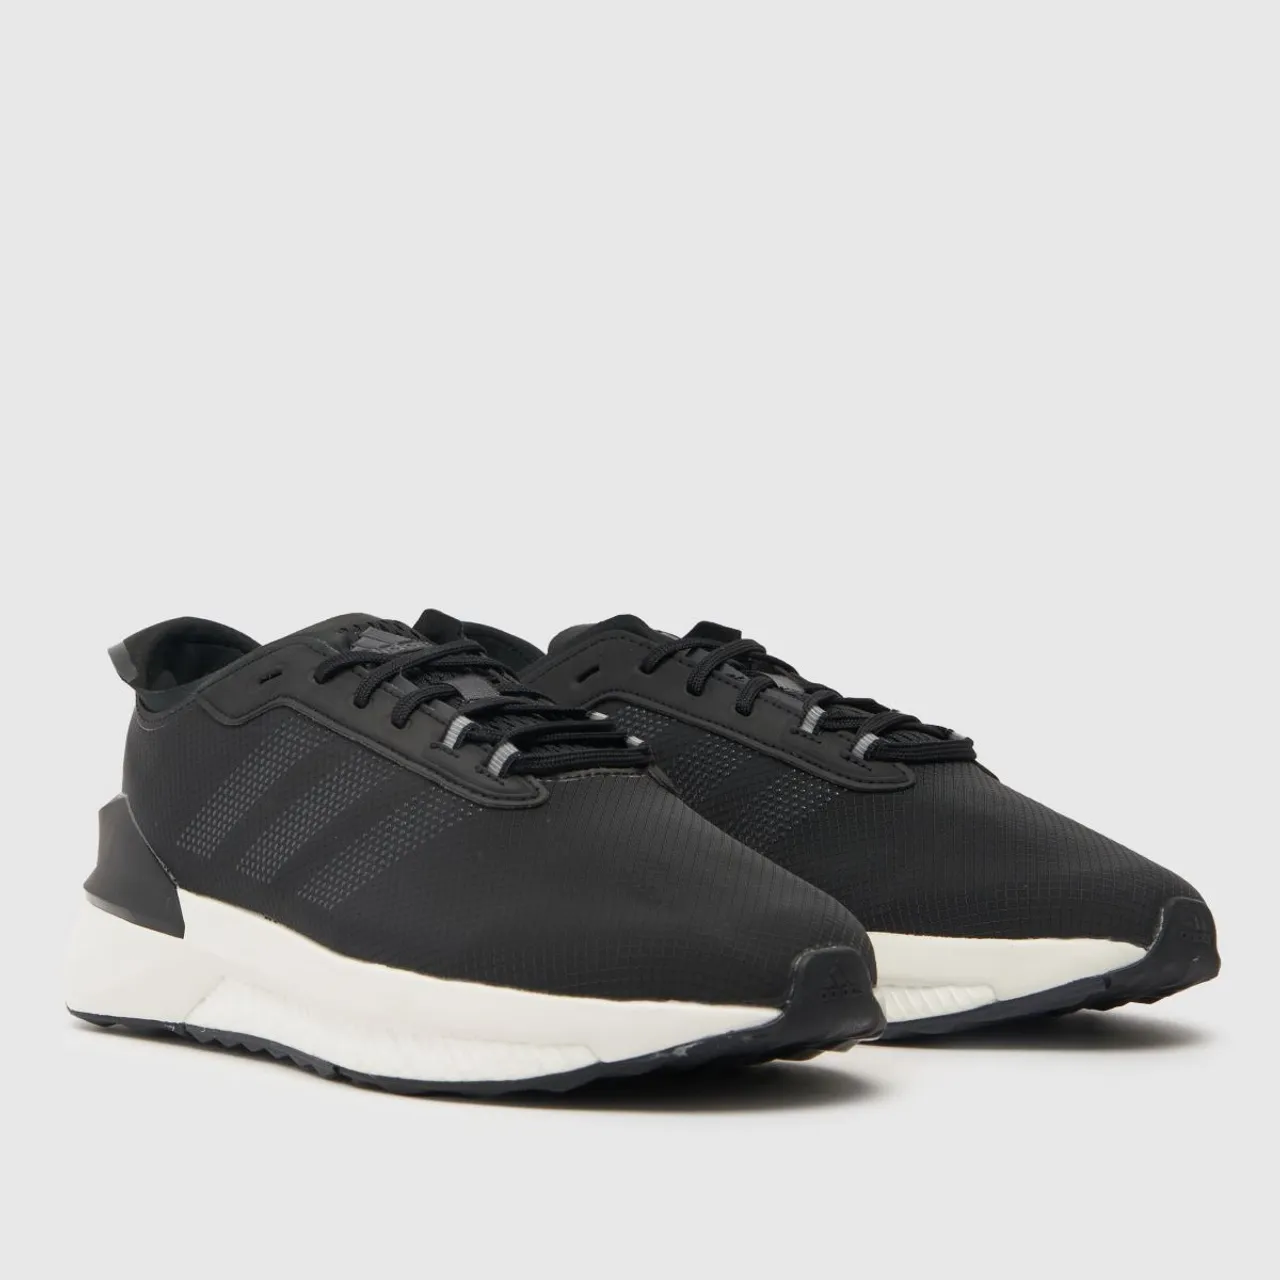 Adidas Avryn Trainers In Black & White